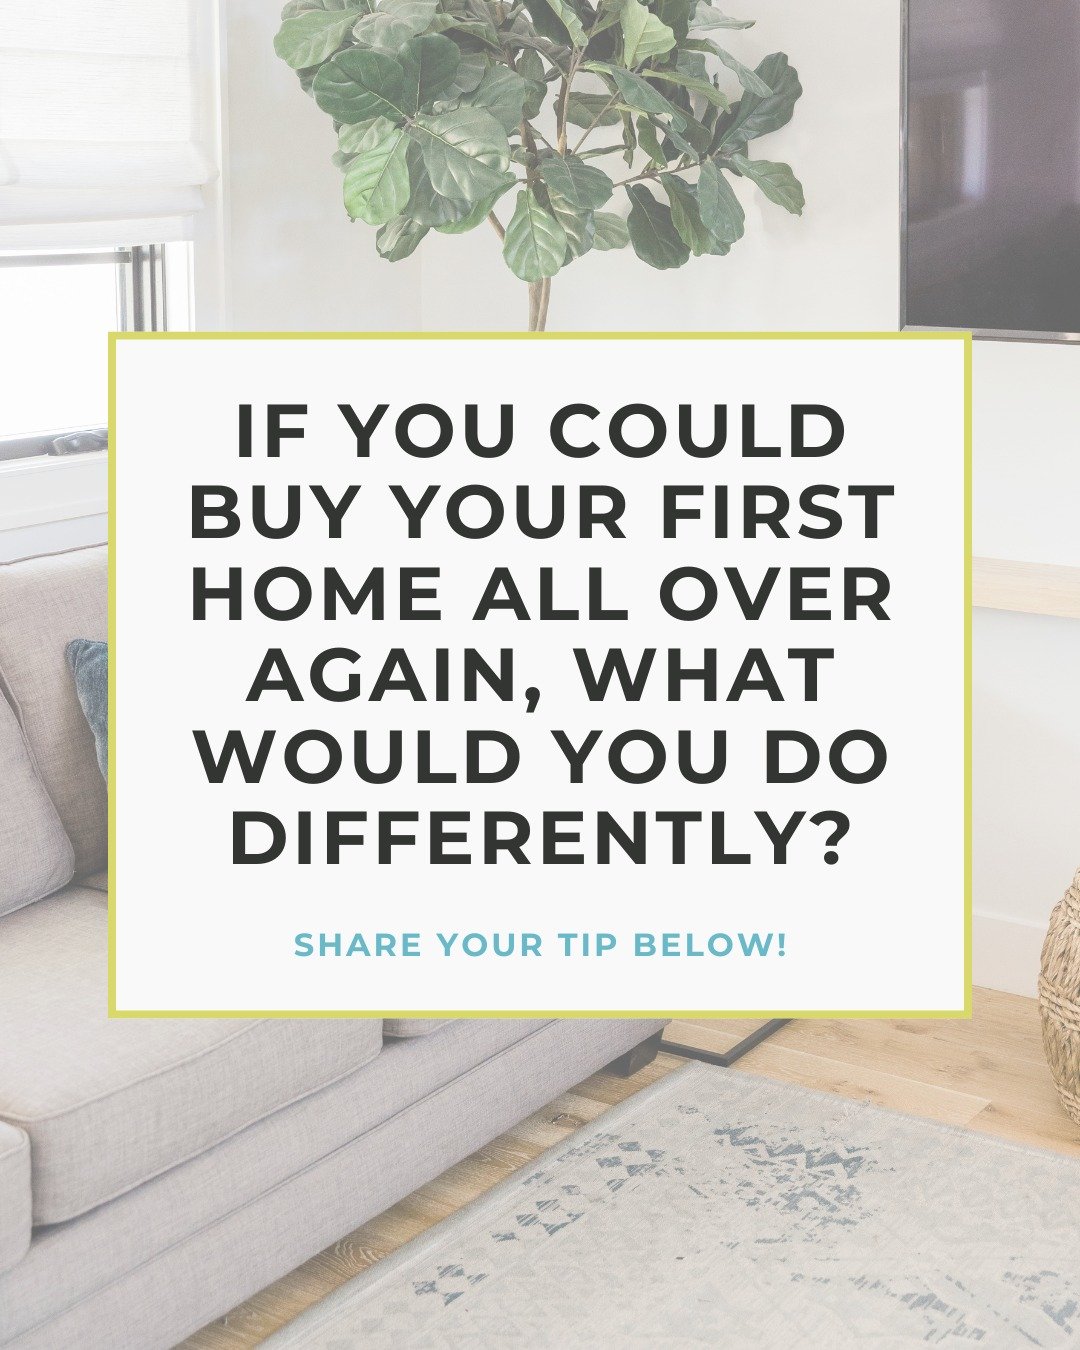 Calling all homeowners! 

Burning question for you: what would you do differently if you could buy your first home all over again? Let us know in the comments!

Would you:
- worry more or less about budgeting?

- spend more time learning about the pr